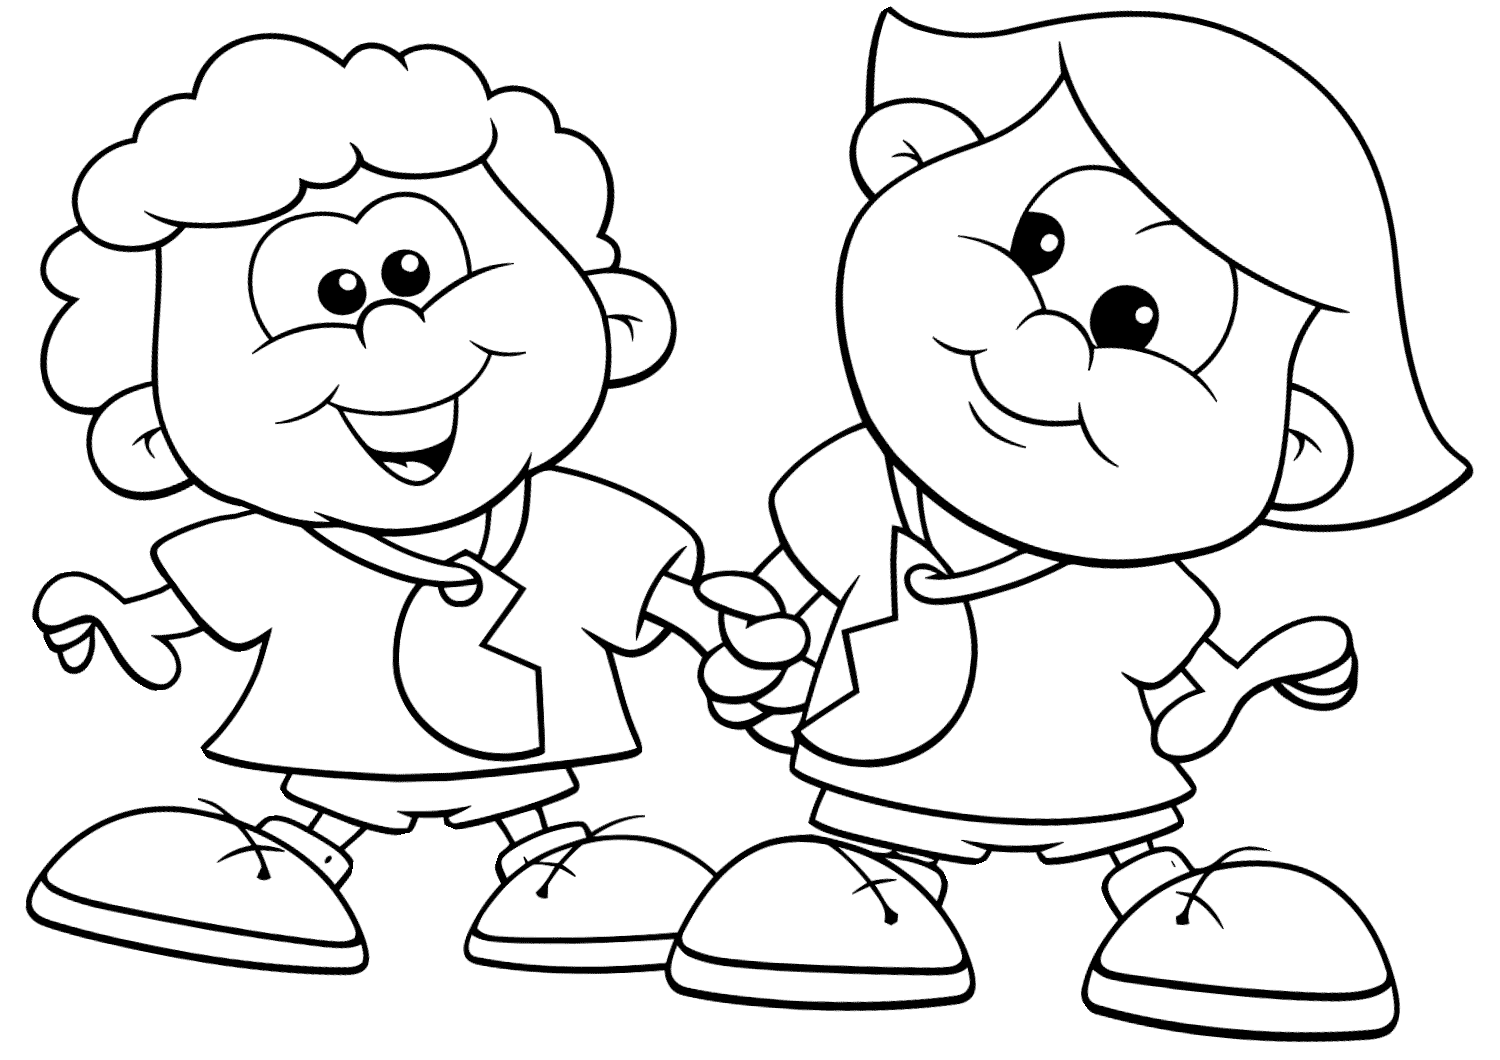 kindness coloring pages for preschoolers